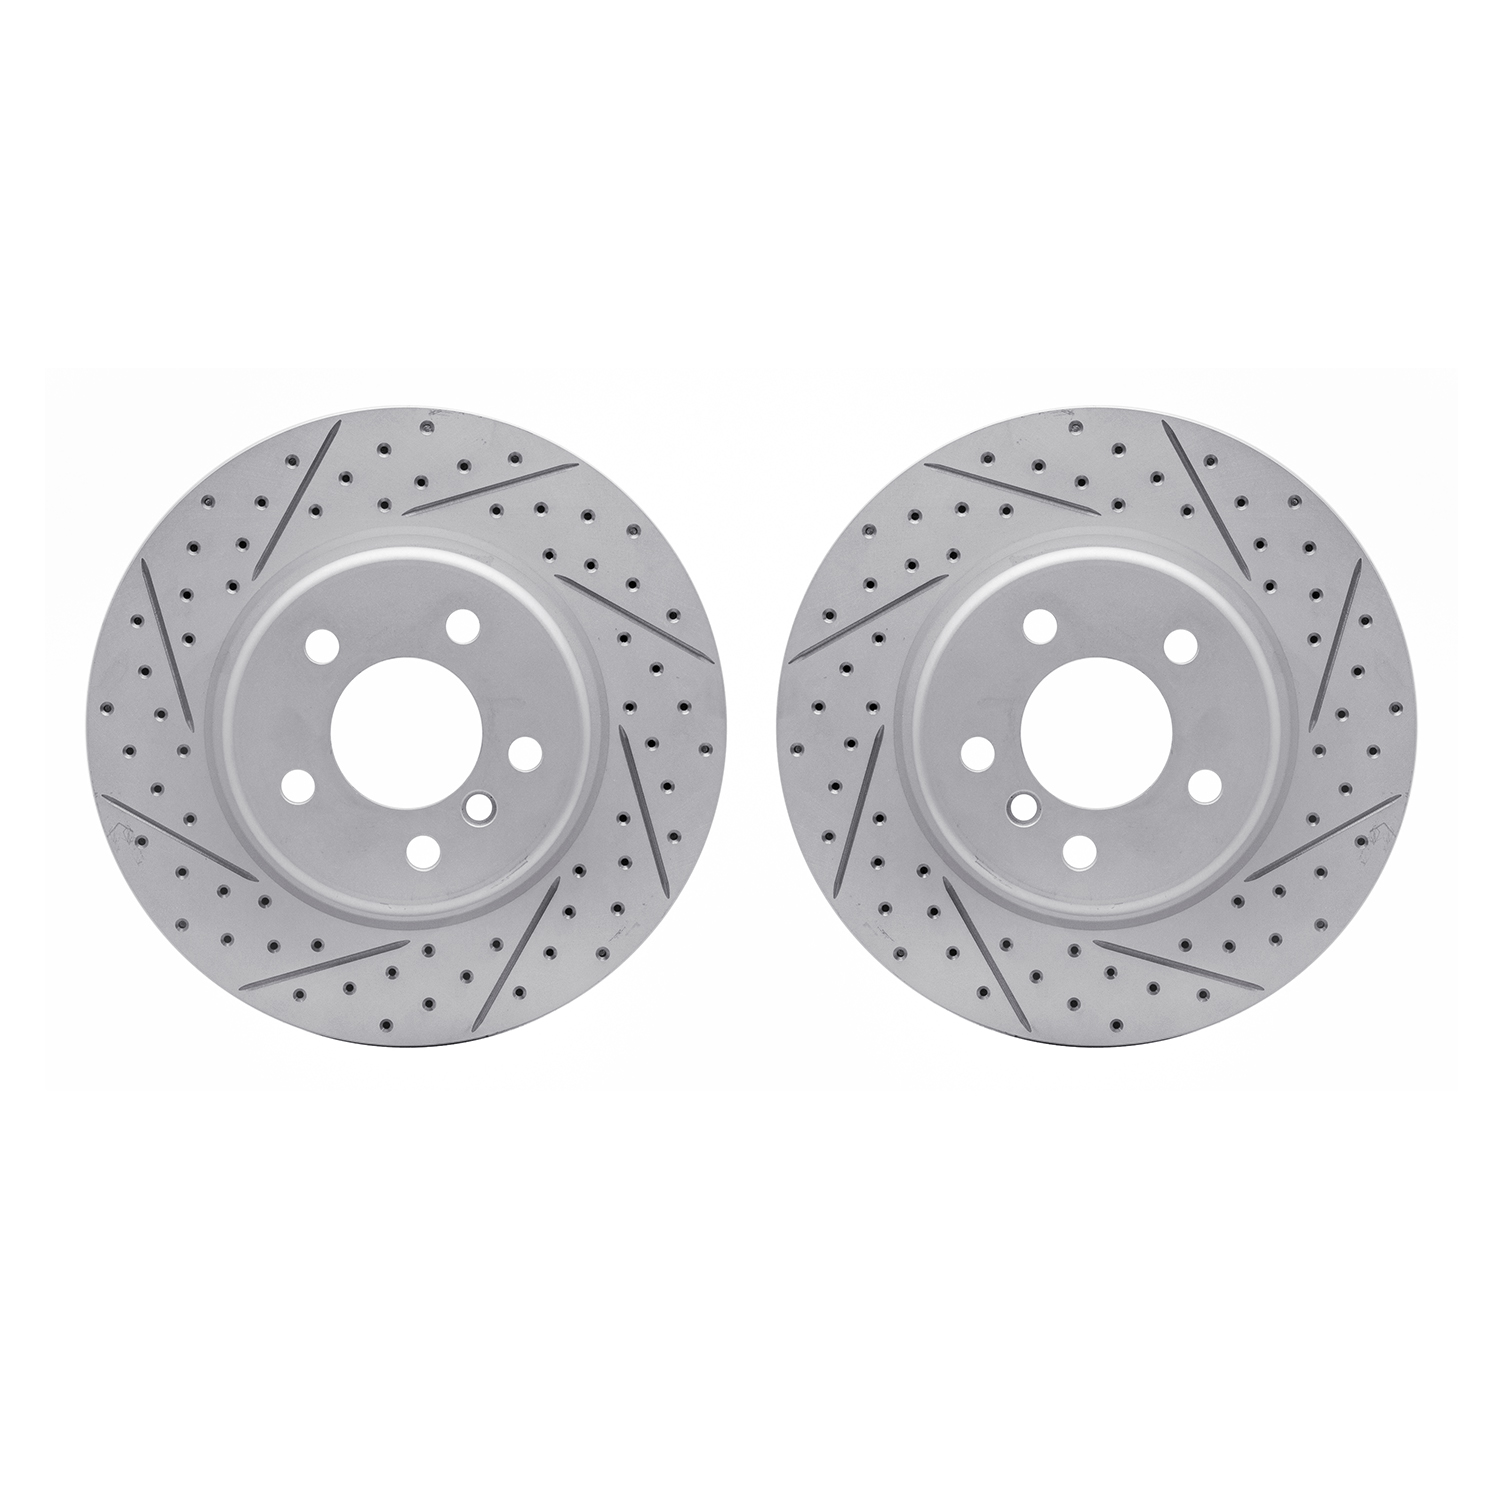 2002-31021 Geoperformance Drilled/Slotted Brake Rotors, 2011-2016 BMW, Position: Front